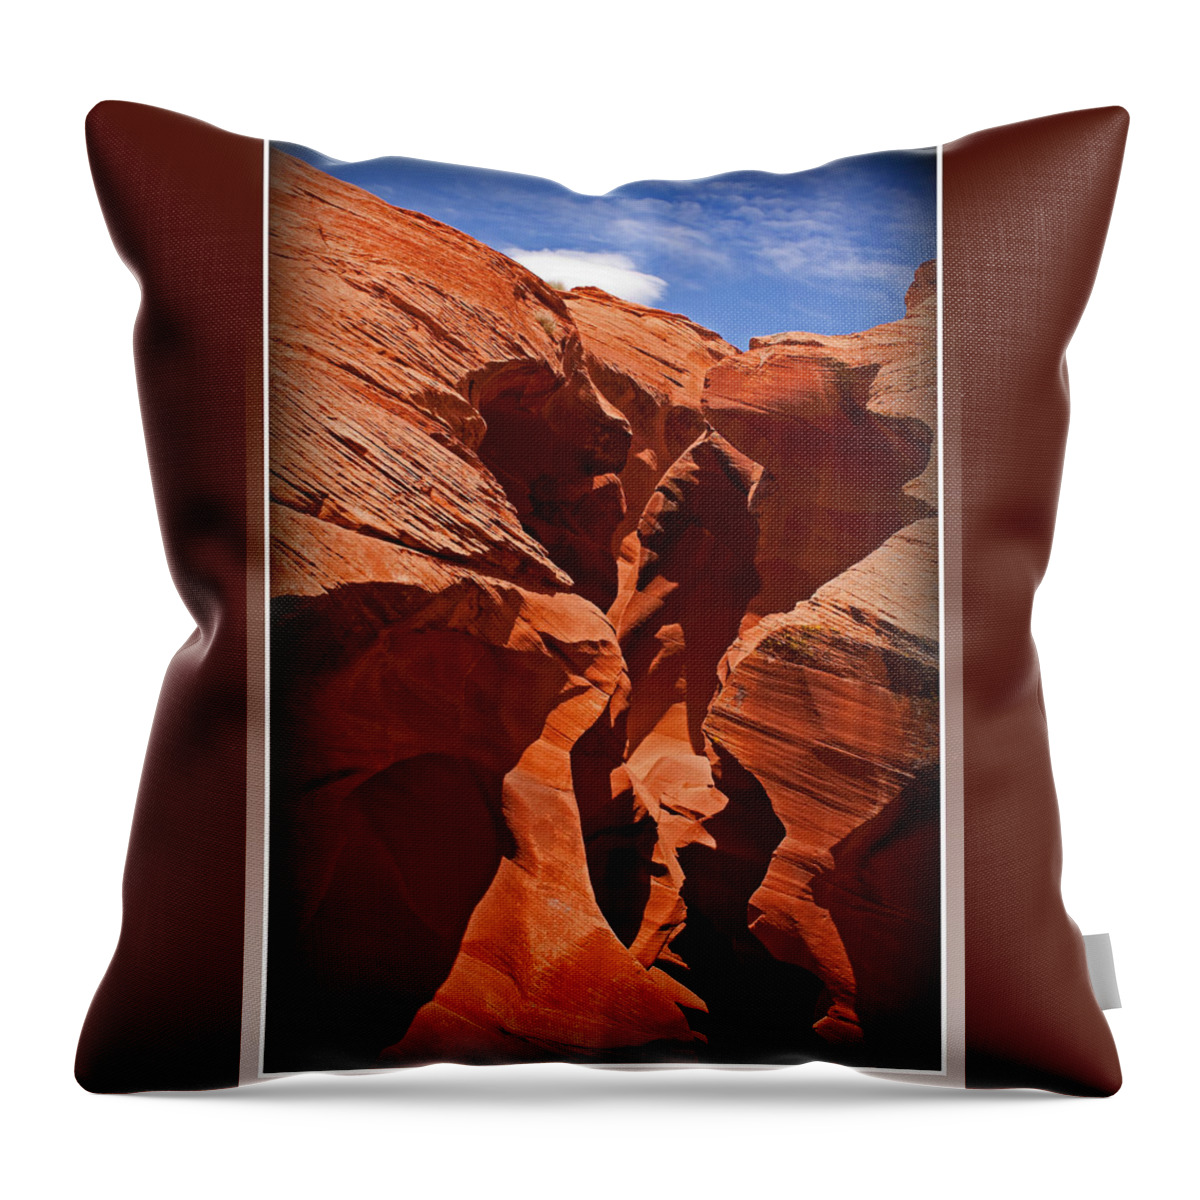 Antelope Throw Pillow featuring the photograph Earth's Erosion by Farol Tomson